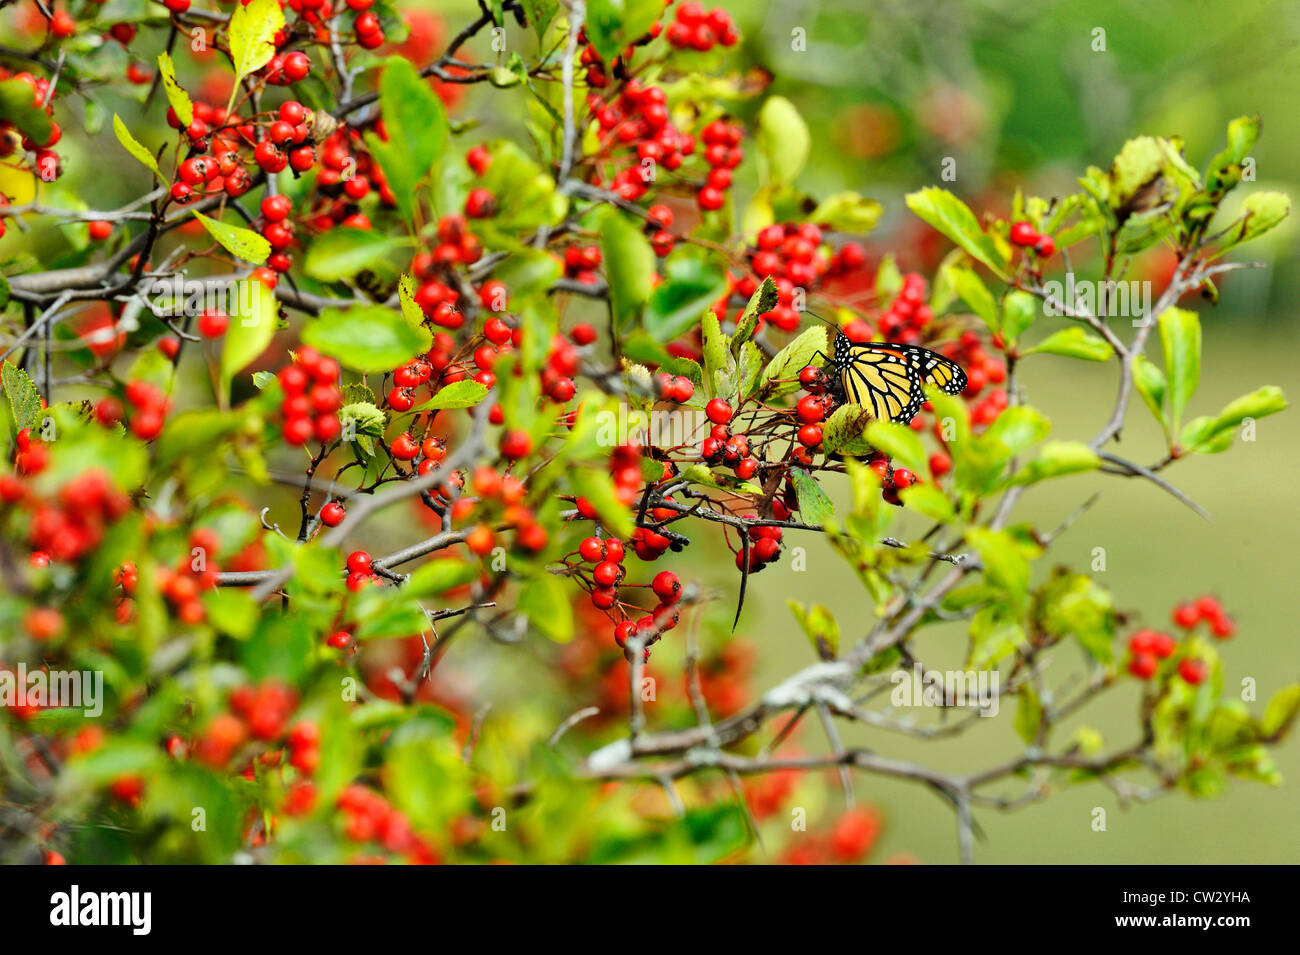 Hawthorn (Crataegus spp.) Fruit with roosting migratory monarch butterfly, Manitoulin Island- Mindemoya, Ontario, Canada Stock Photo